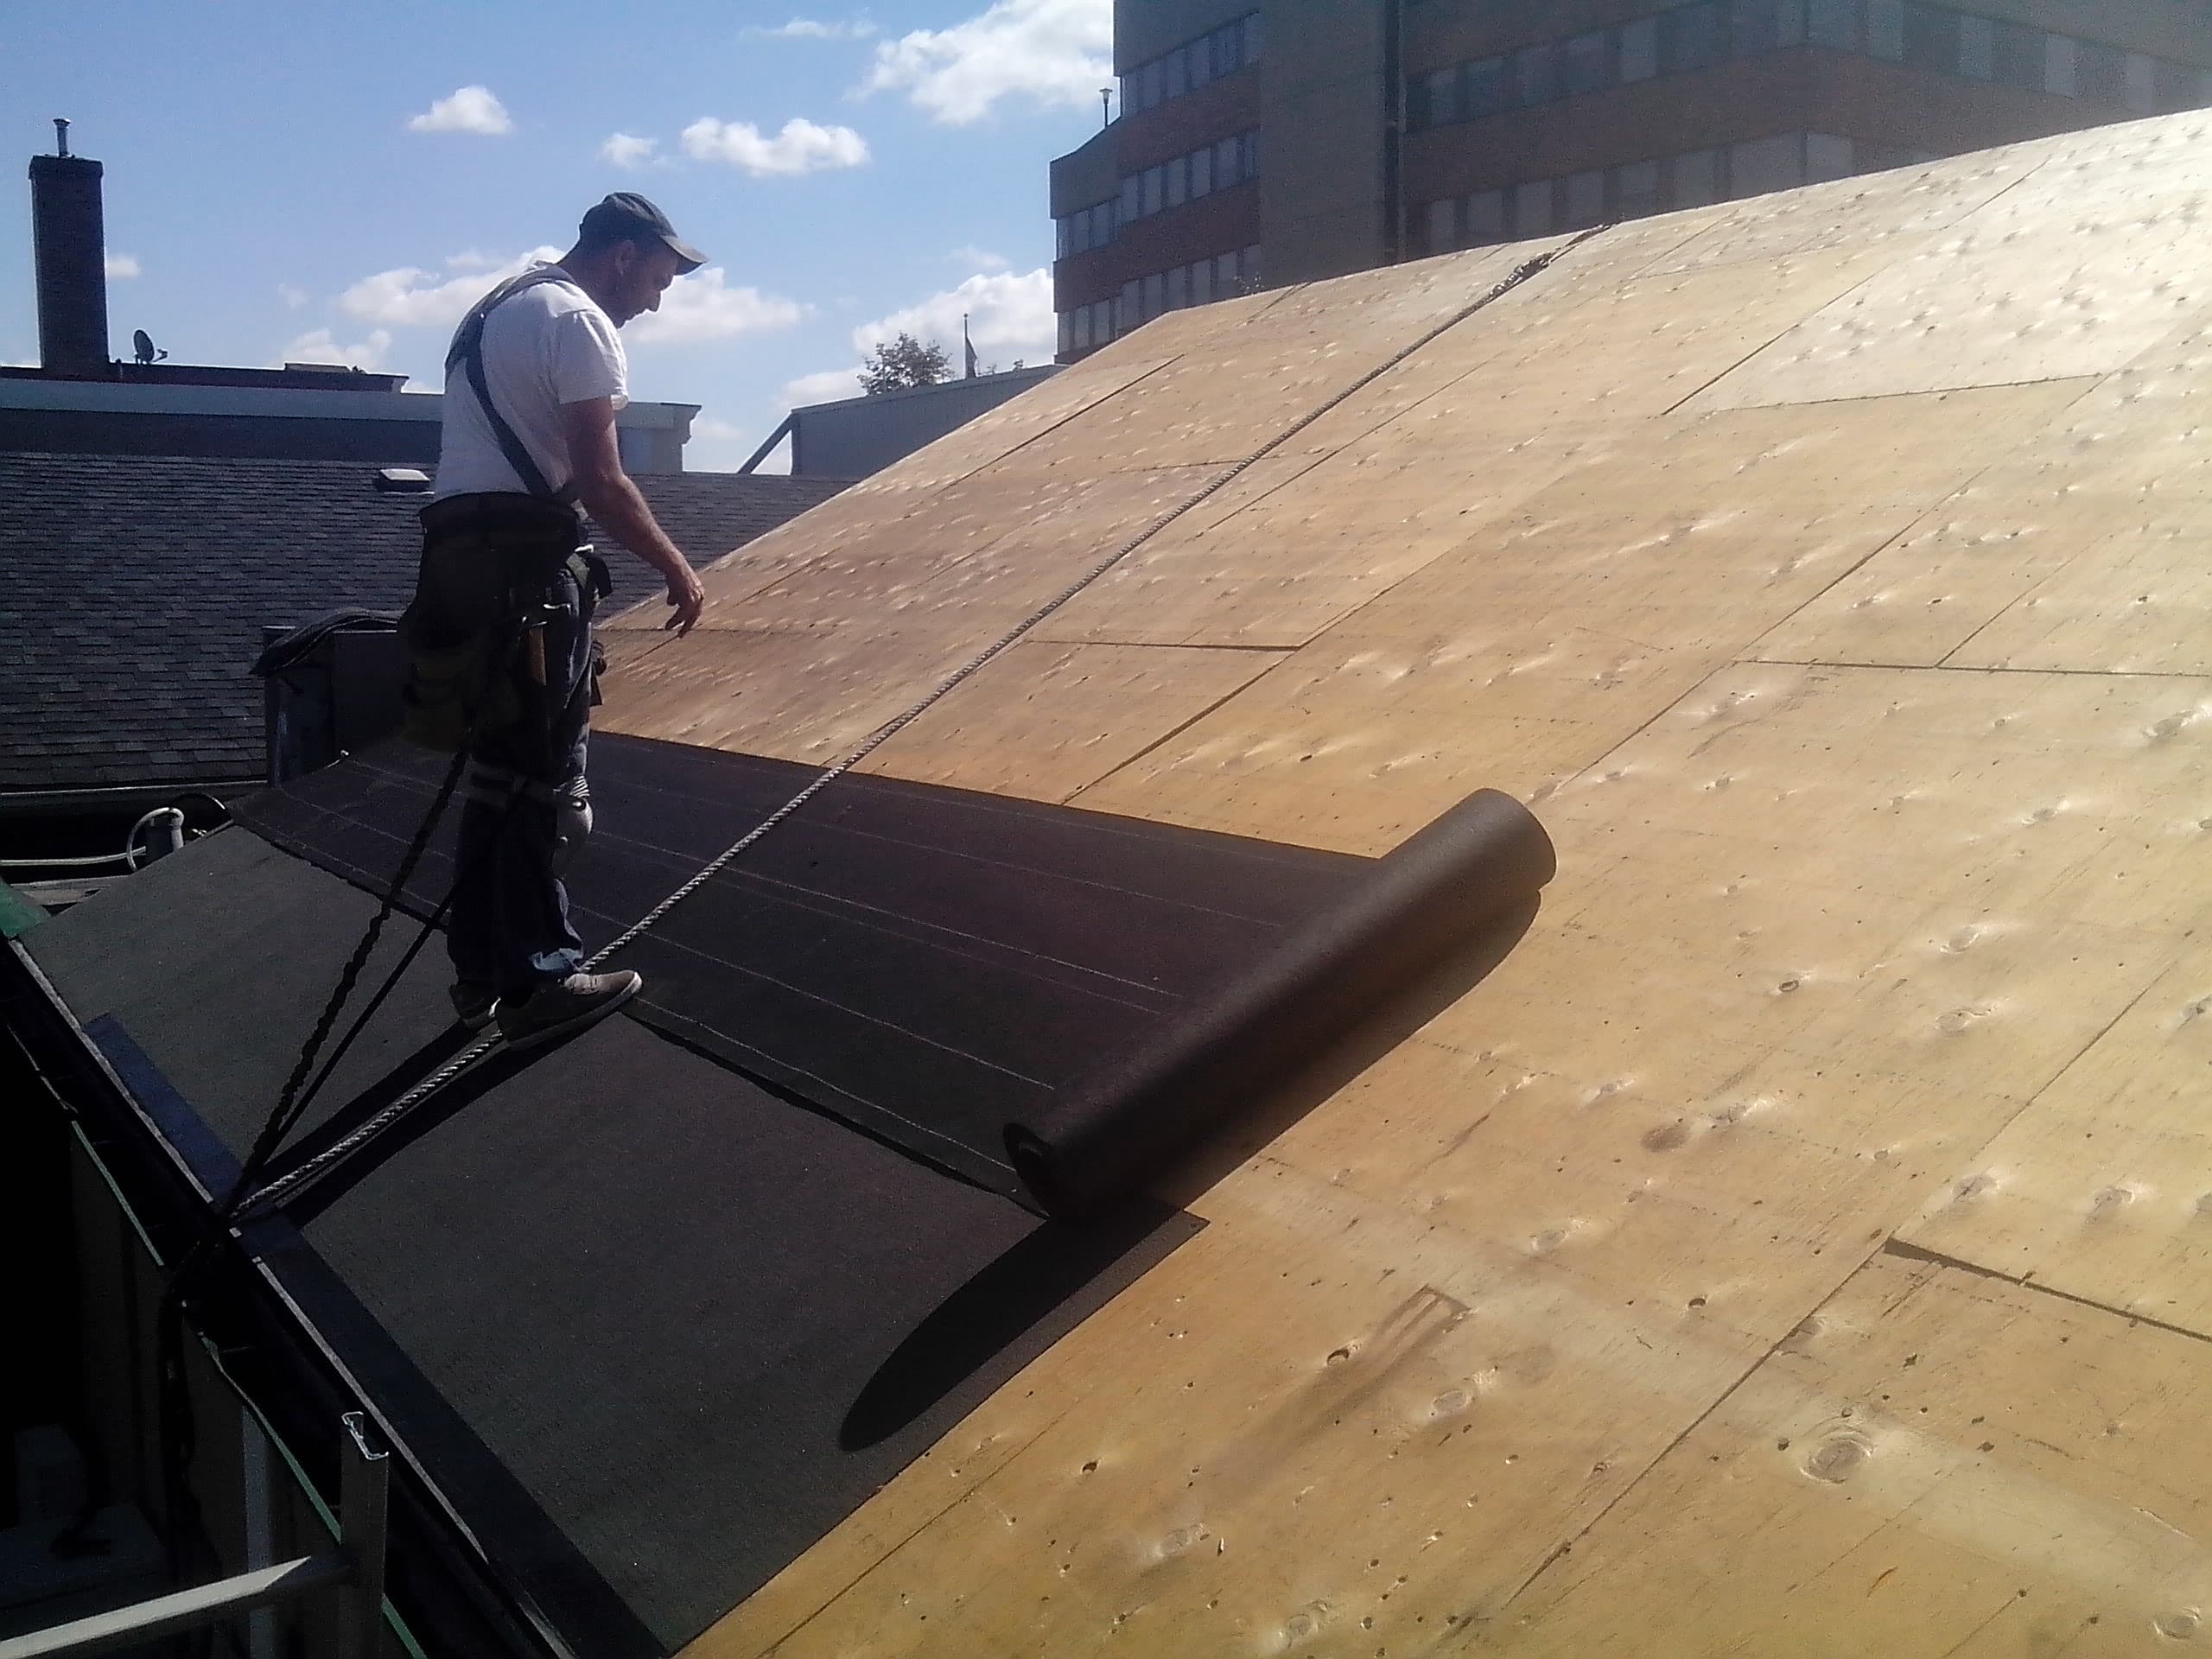 Top Quality Roofs at The Lowest Price Around